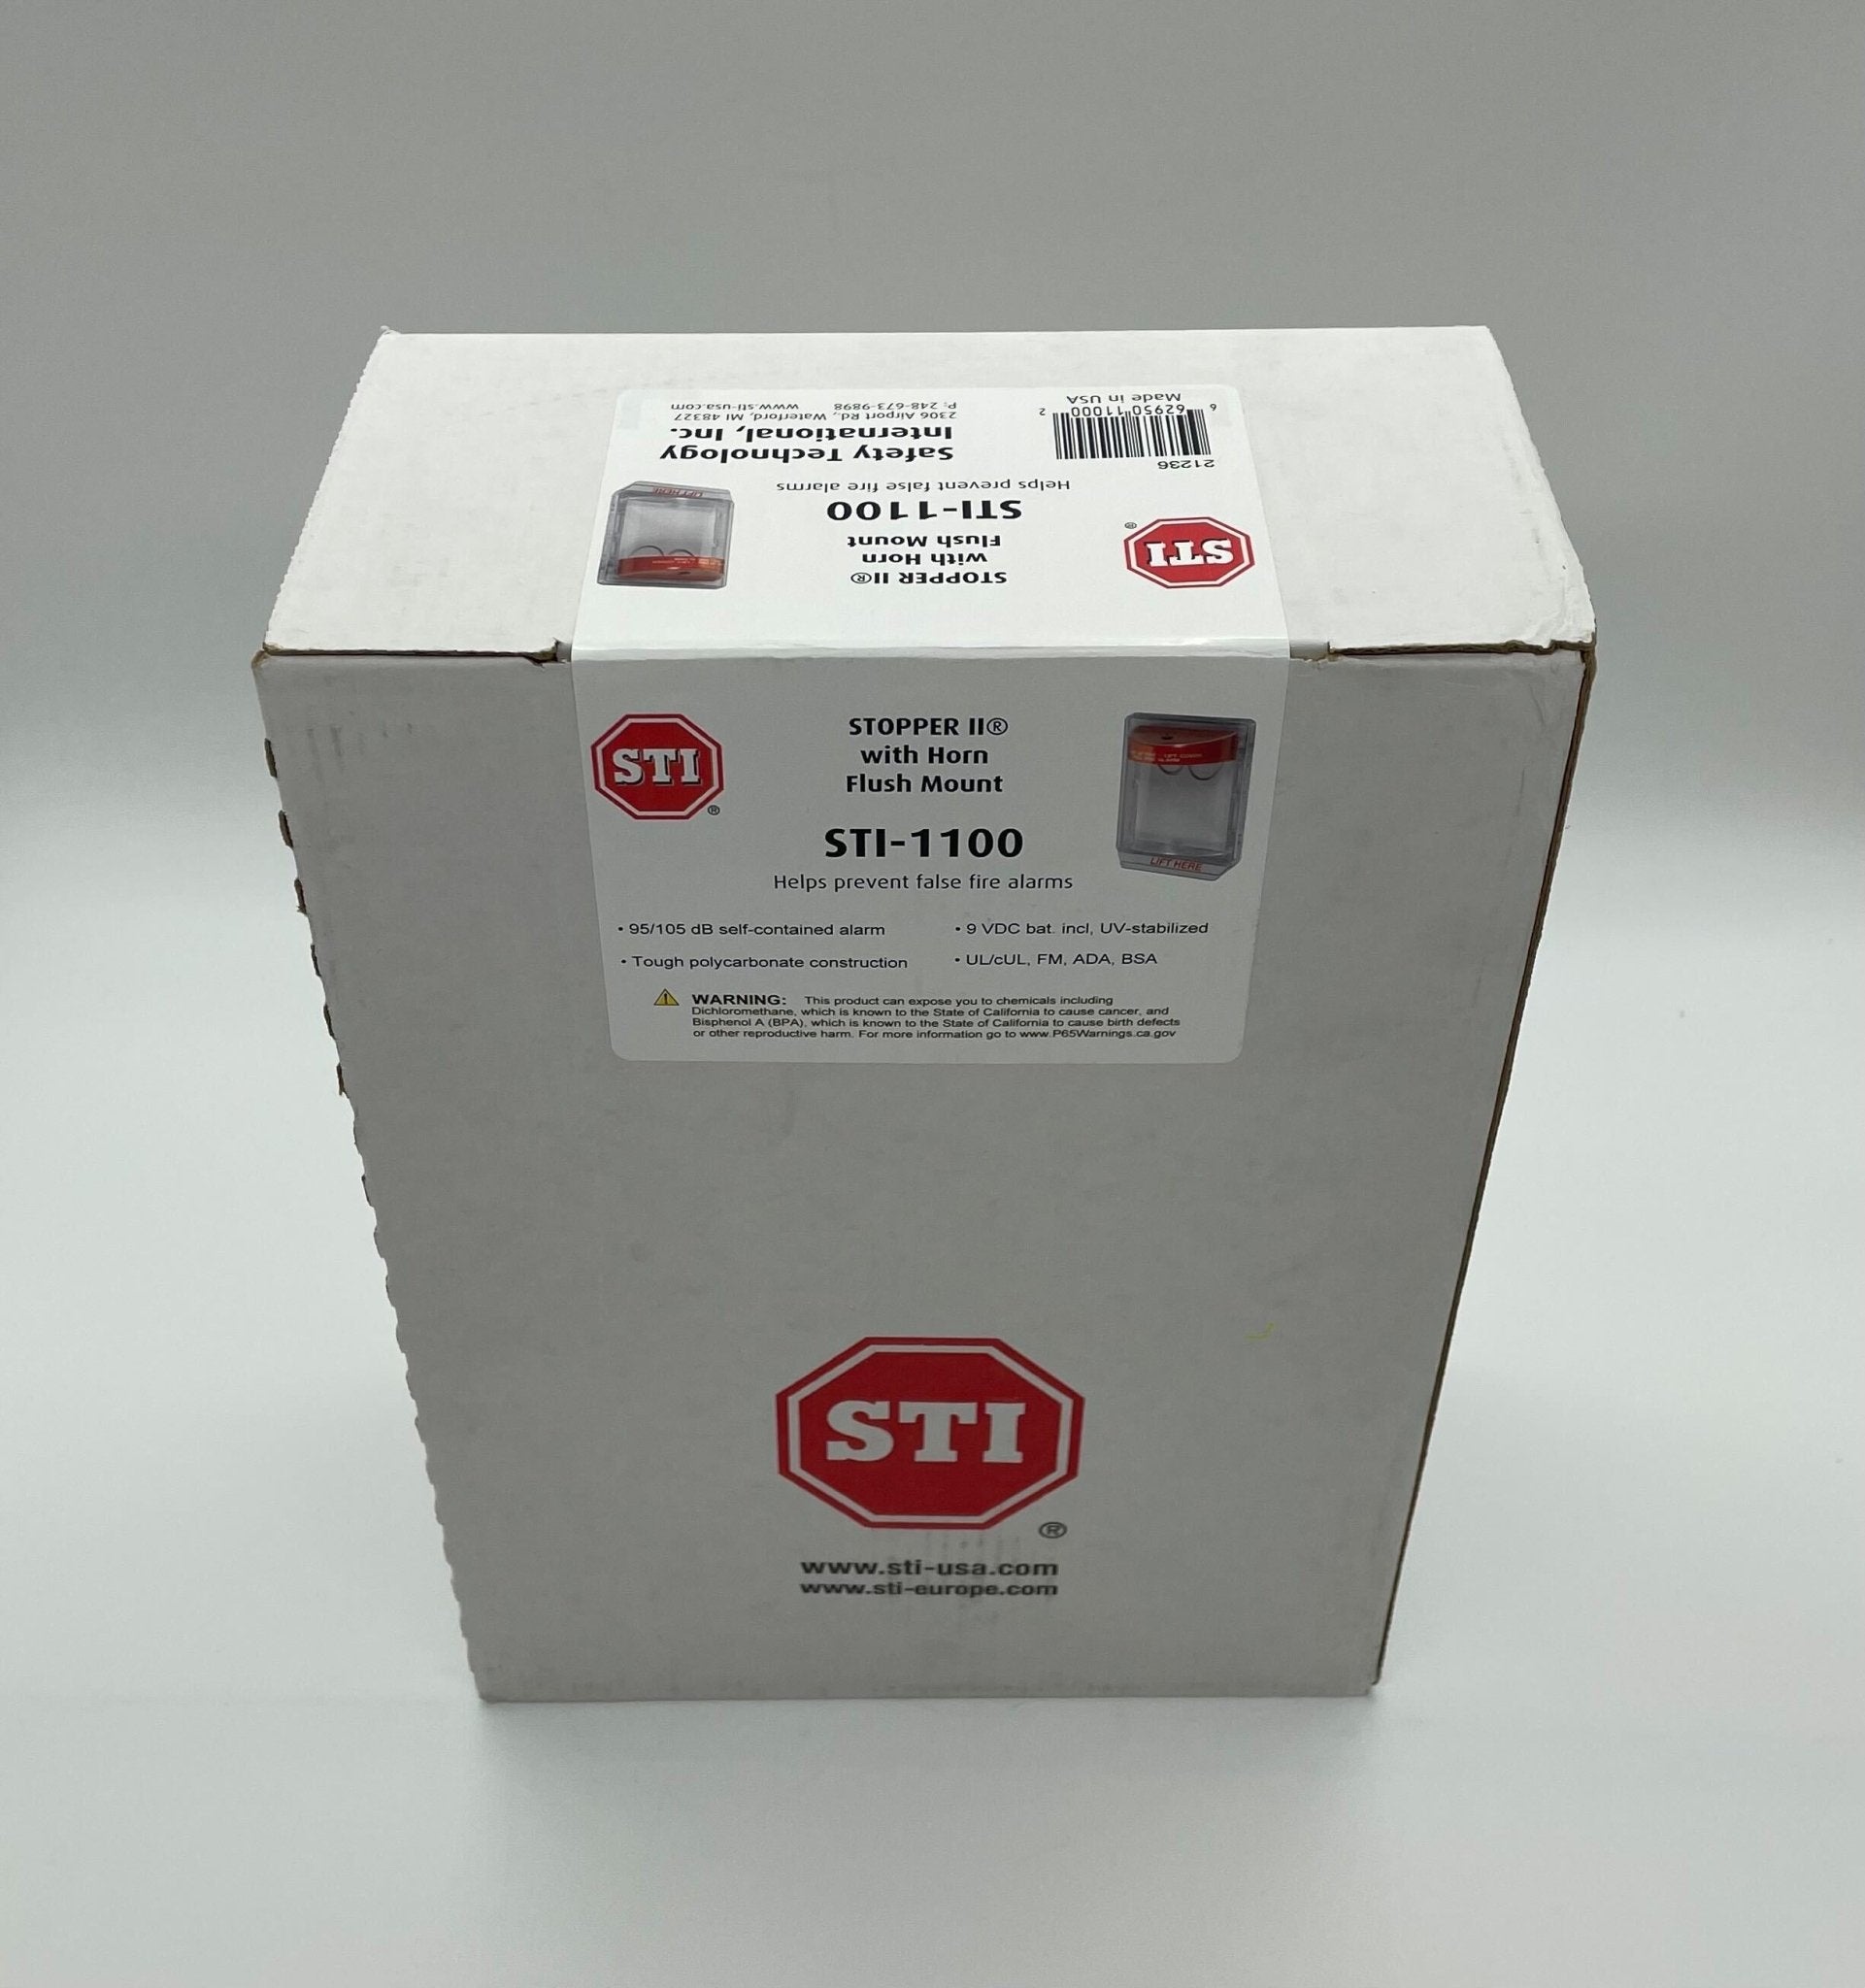 STI-1100 With Horn Flush Mount, Fire - The Fire Alarm Supplier